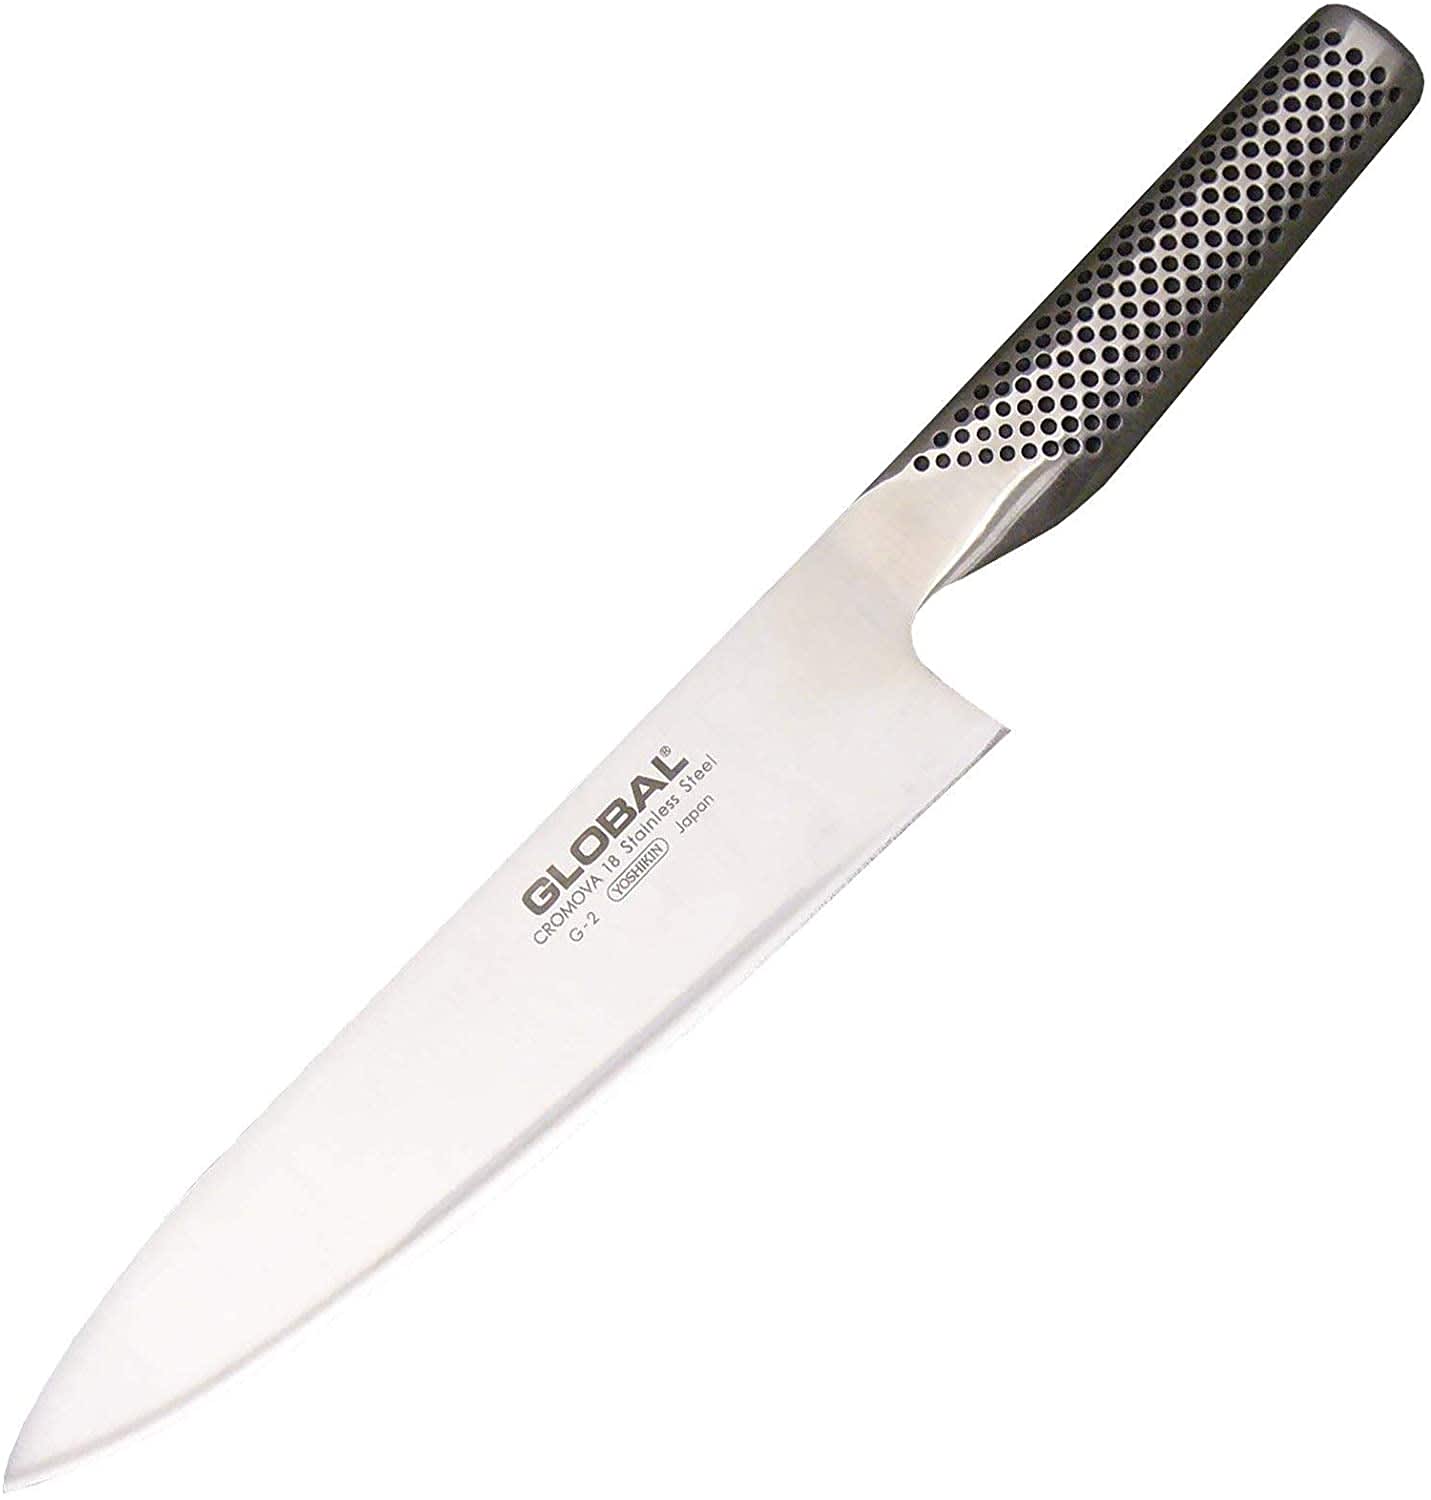 Kitchen Knives (1000+ products) compare prices today »